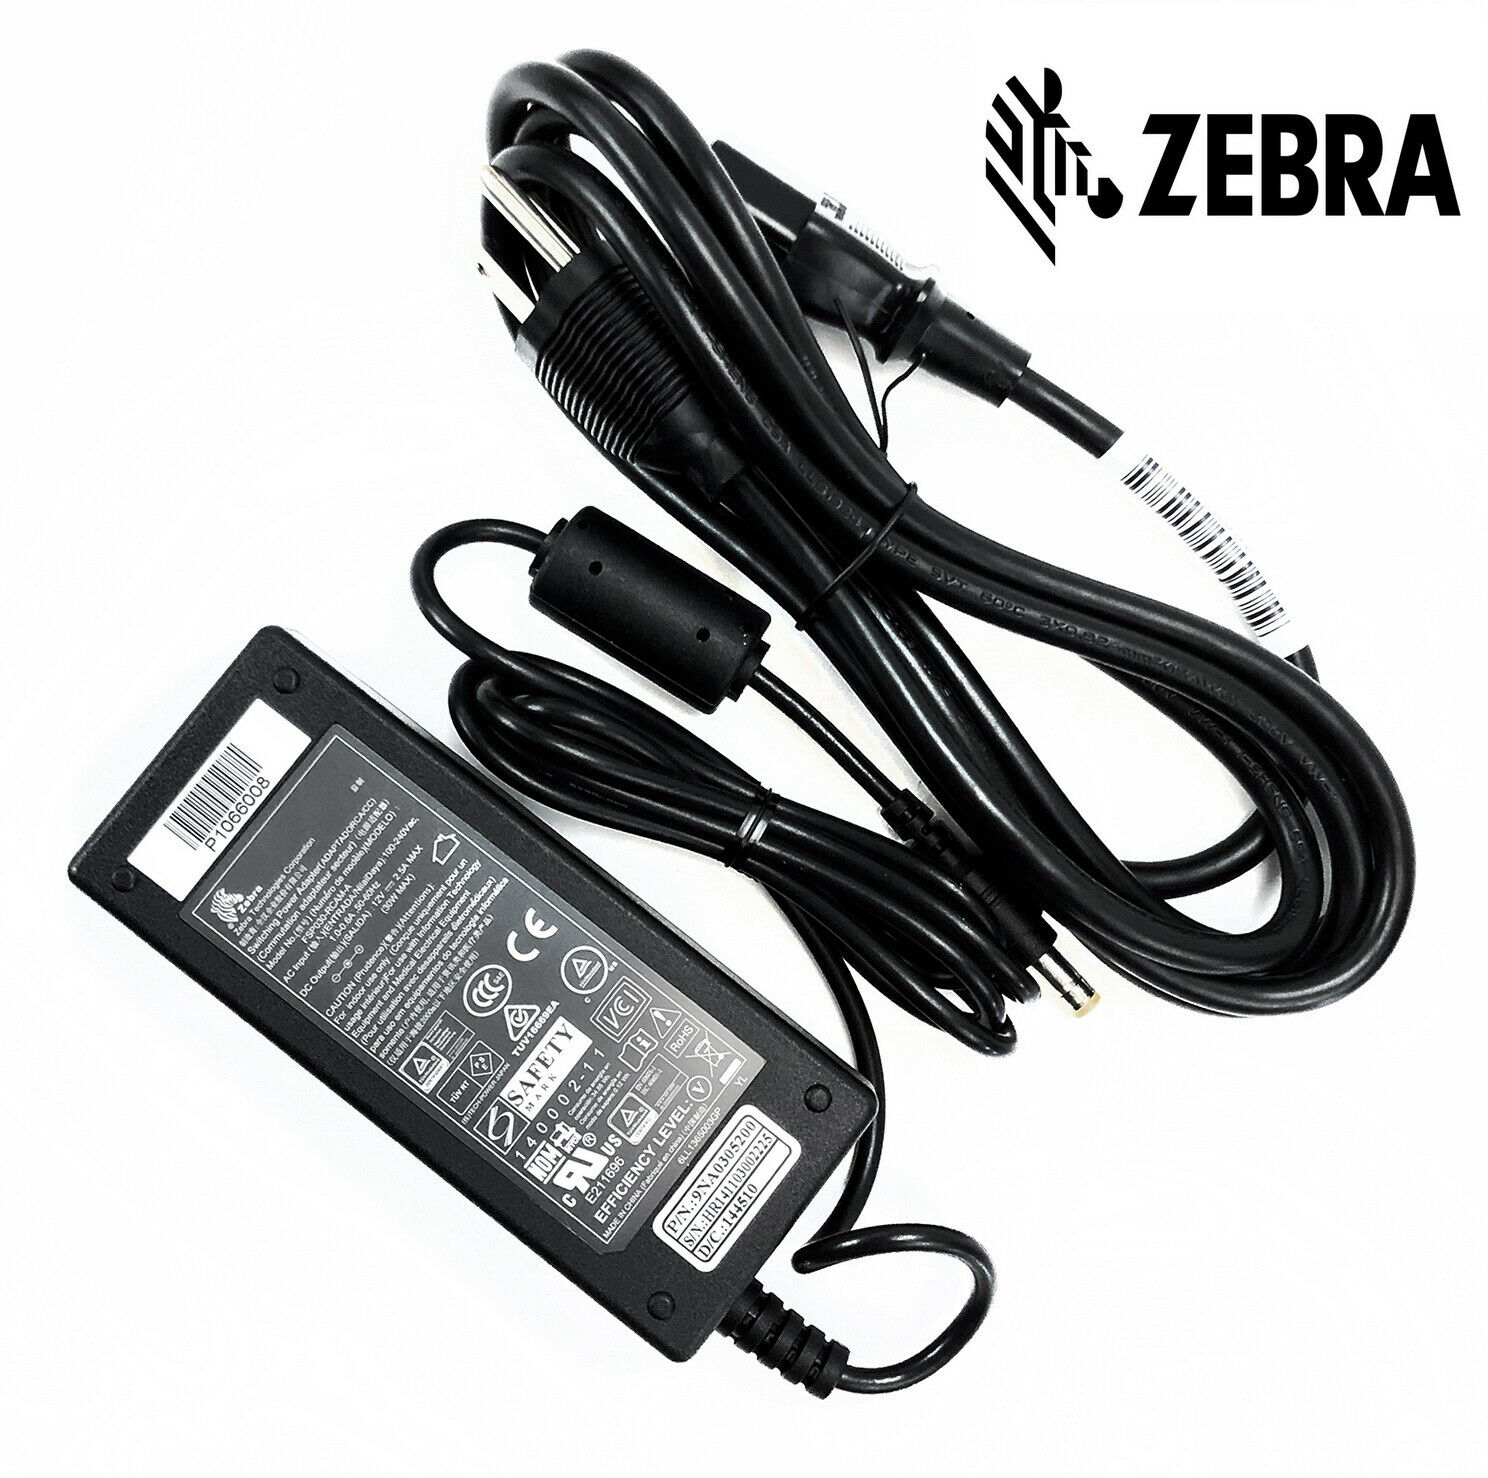 NEW OEM Zebra Healthcare AC Adapter Charger for ZQ510 ZQ520 Printers W/P.Cord Country/Region of Manufacture: Japan Com